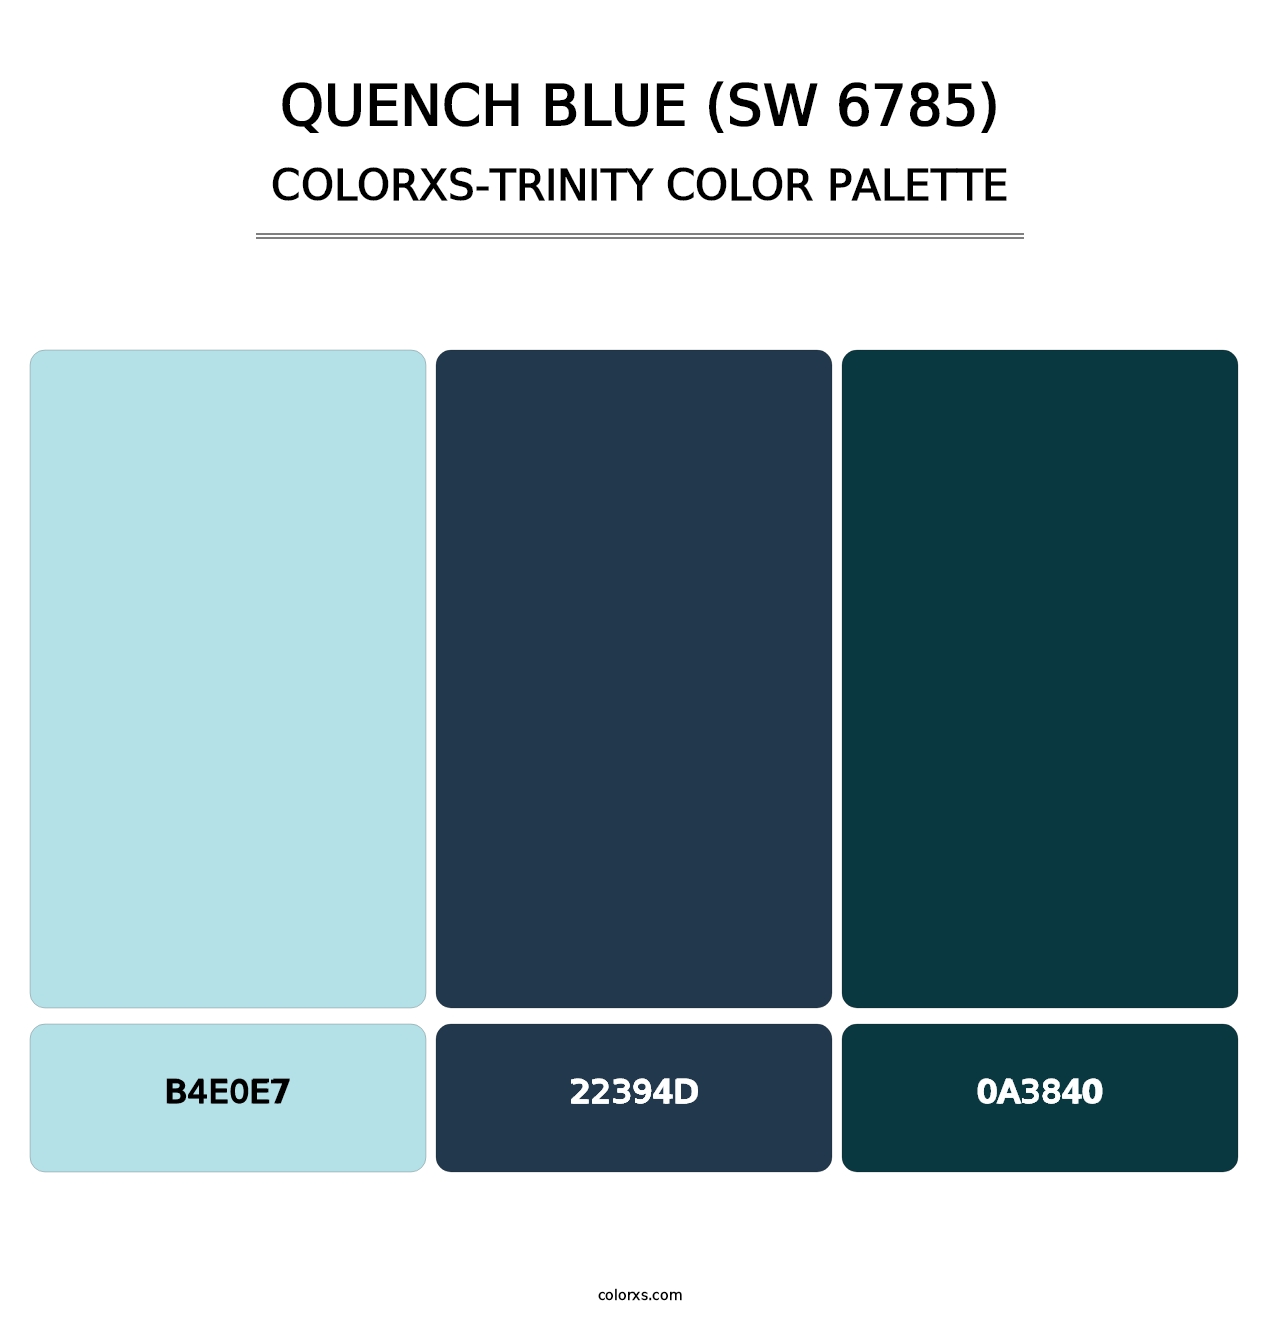 Quench Blue (SW 6785) - Colorxs Trinity Palette